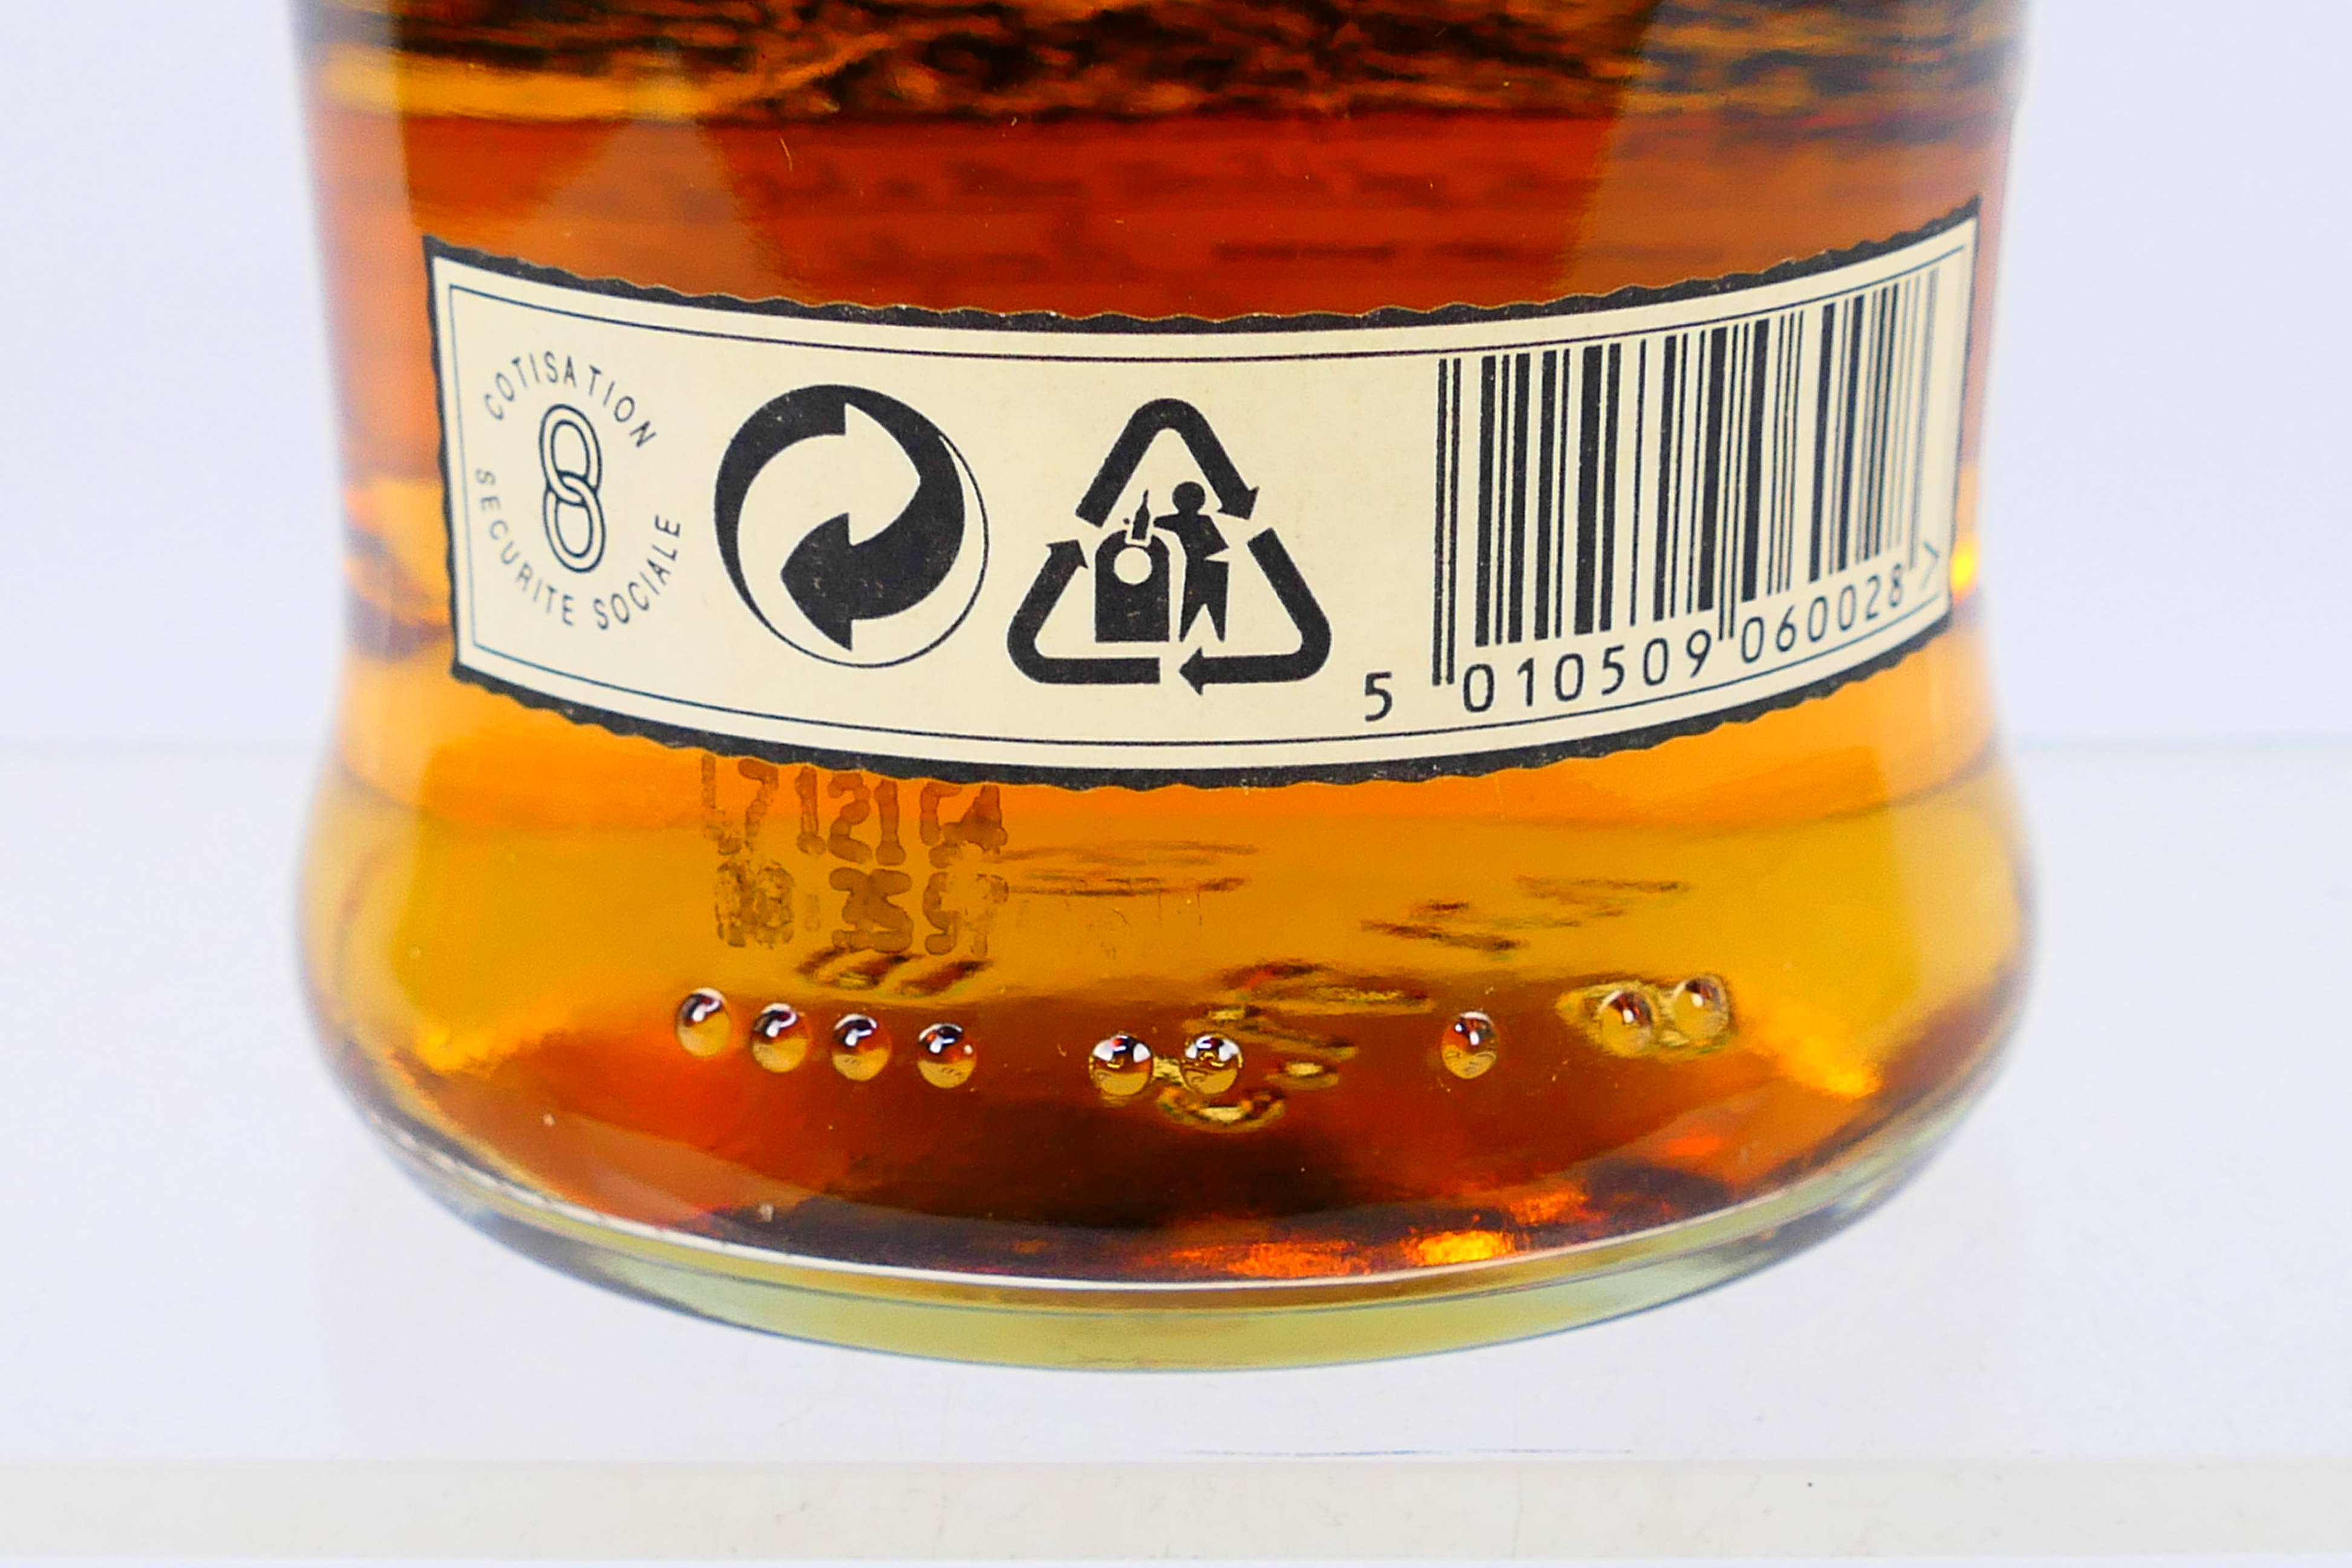 A 70cl bottle of Old Pulteney 12 Year Old single malt whisky, 40% abv. - Image 5 of 6